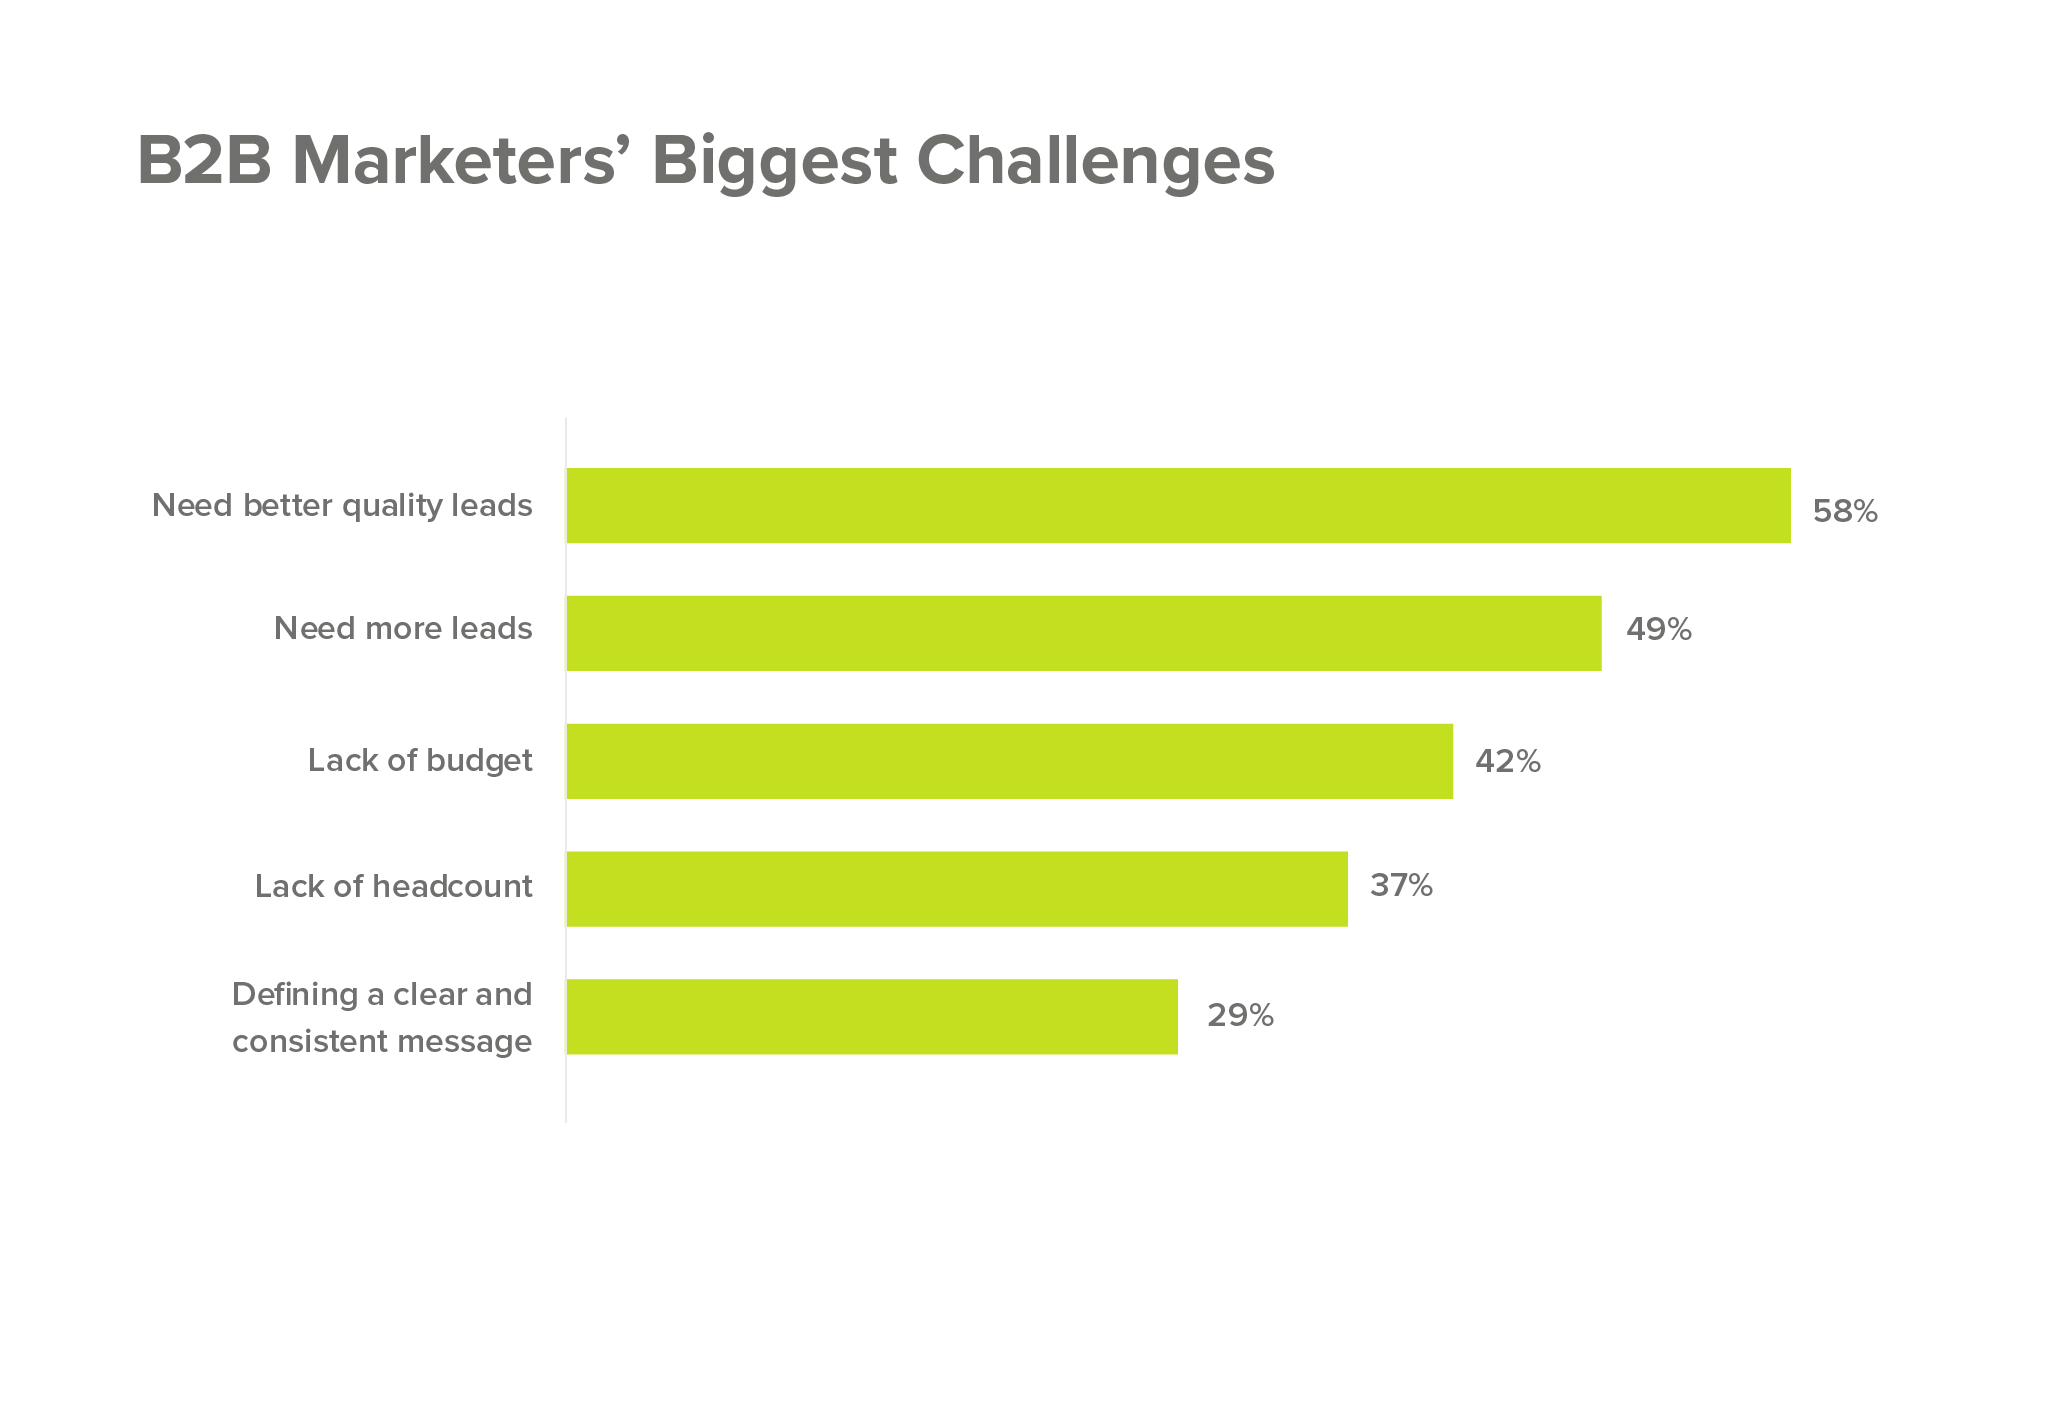 Biggest challenge for B2B marketers